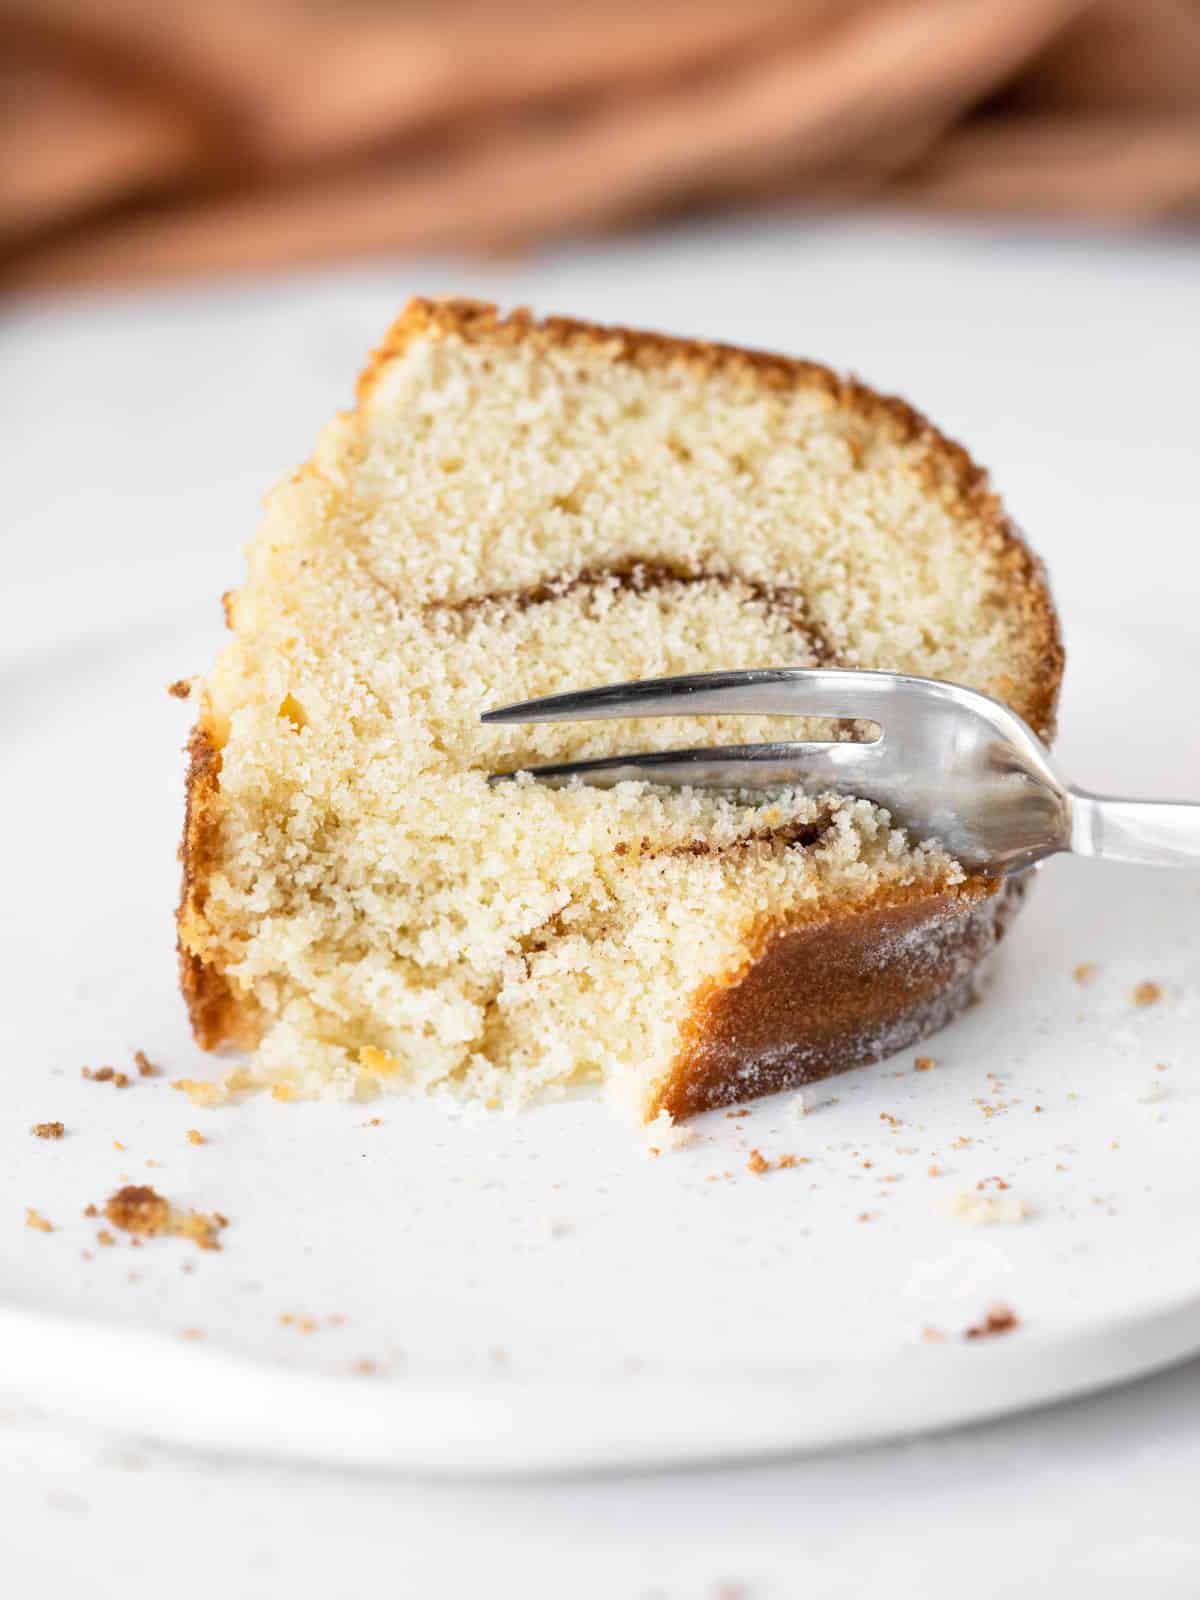 Forking a slice of cinnamon swirl bundt cake on a white plate. Brown cloth in the background.